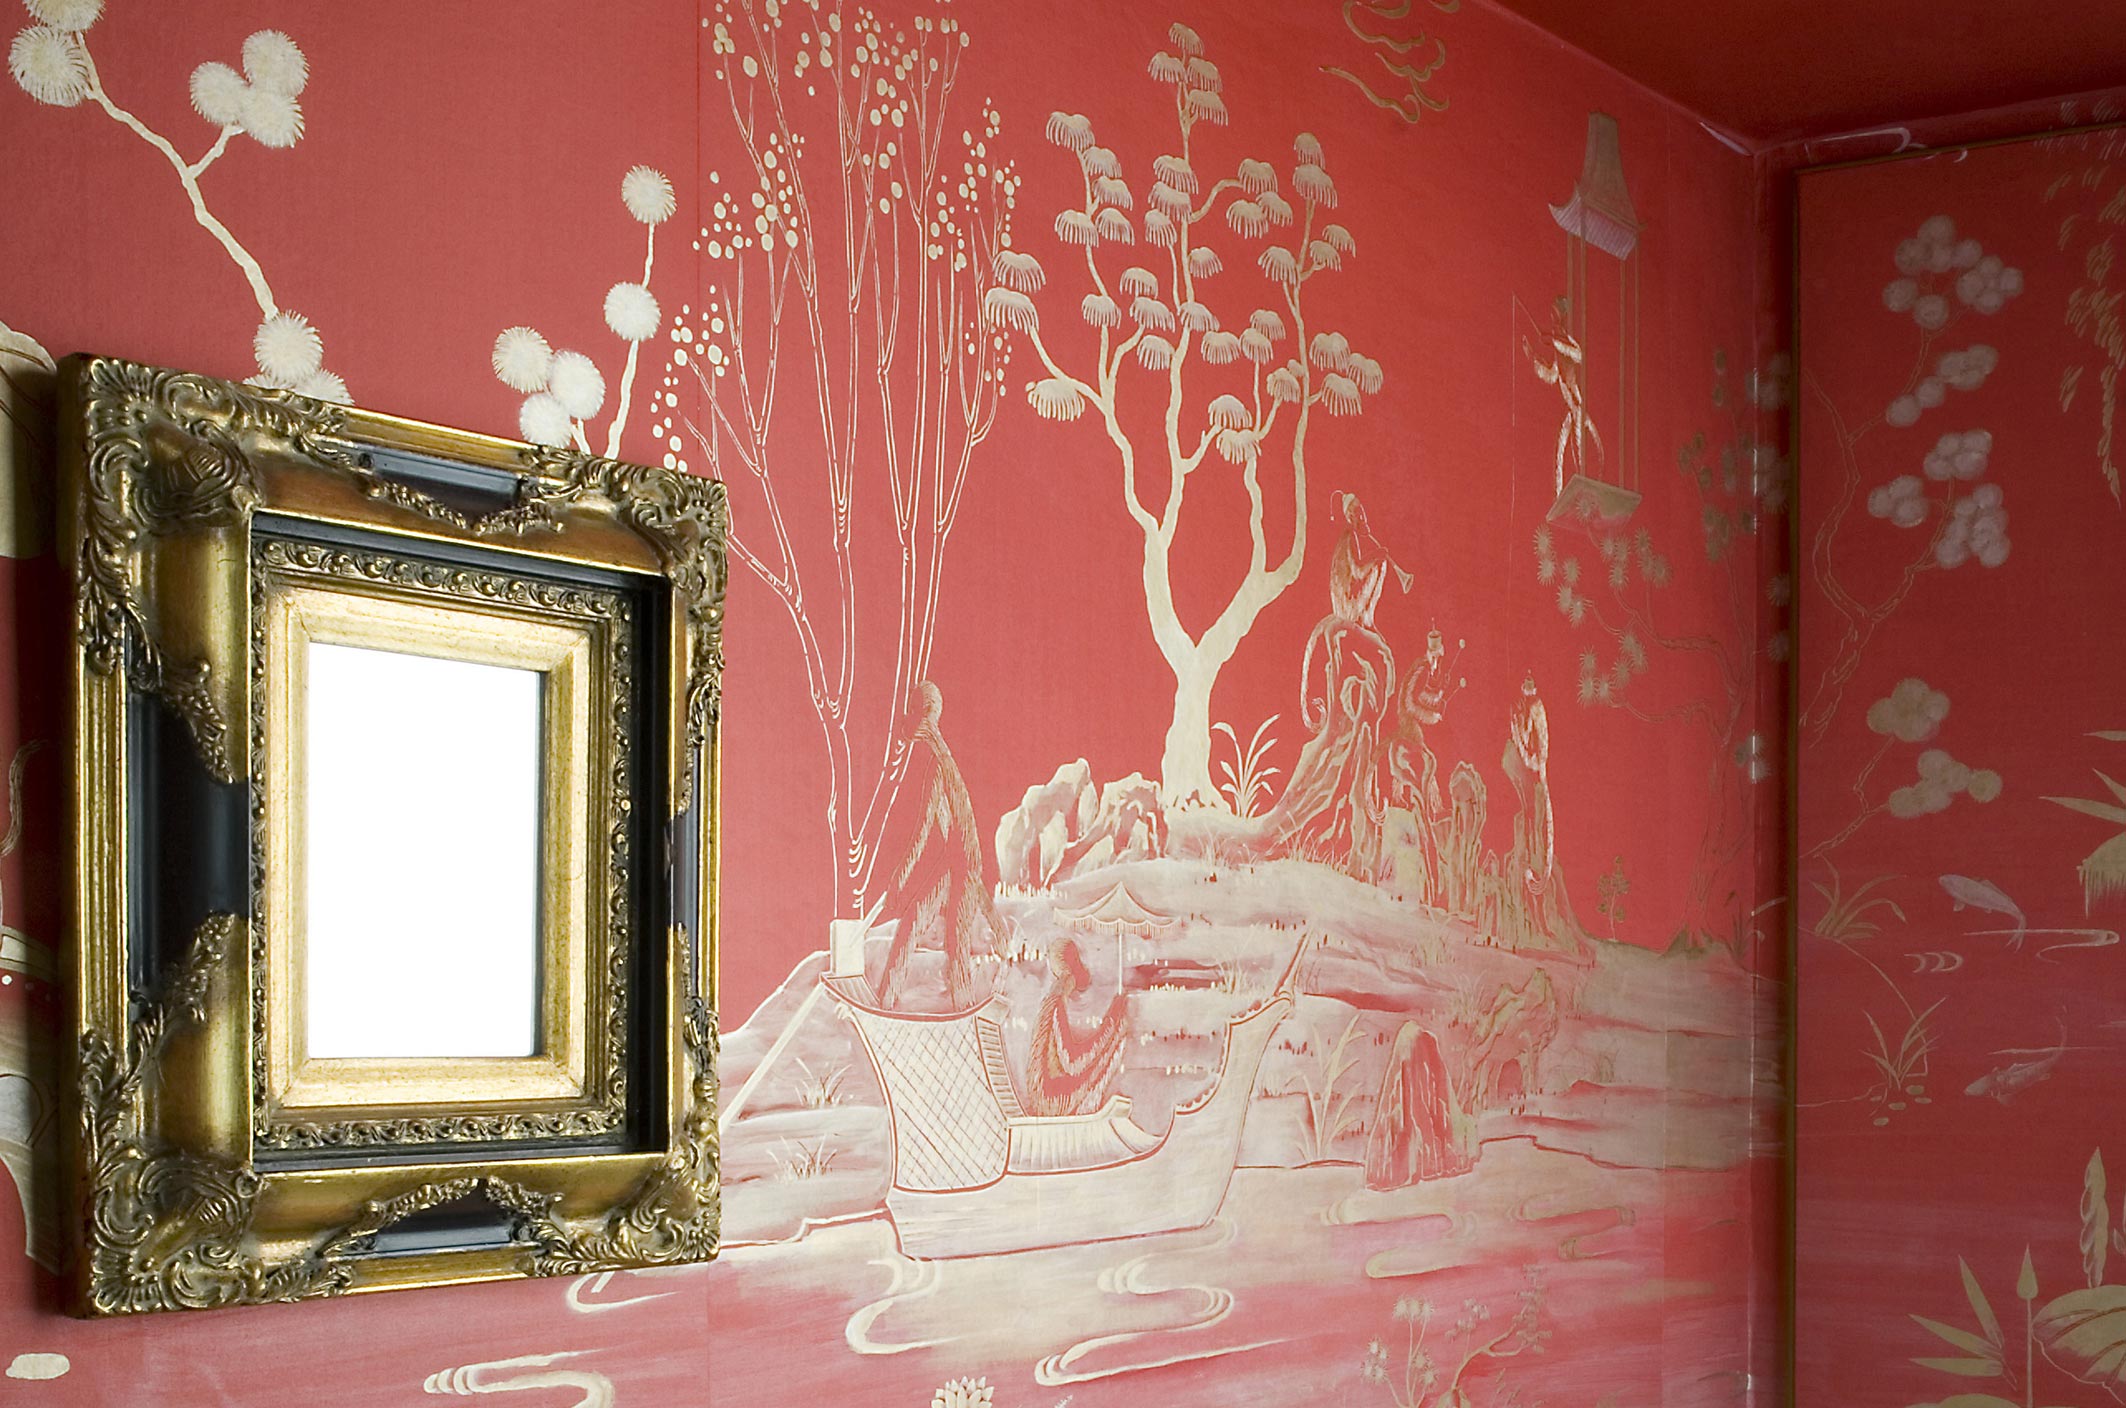 FROMENTAL AND LALIQUE COLLABORATE ON HIRONDELLES A NEW SILK WALLCOVERING  DESIGN  Archetech